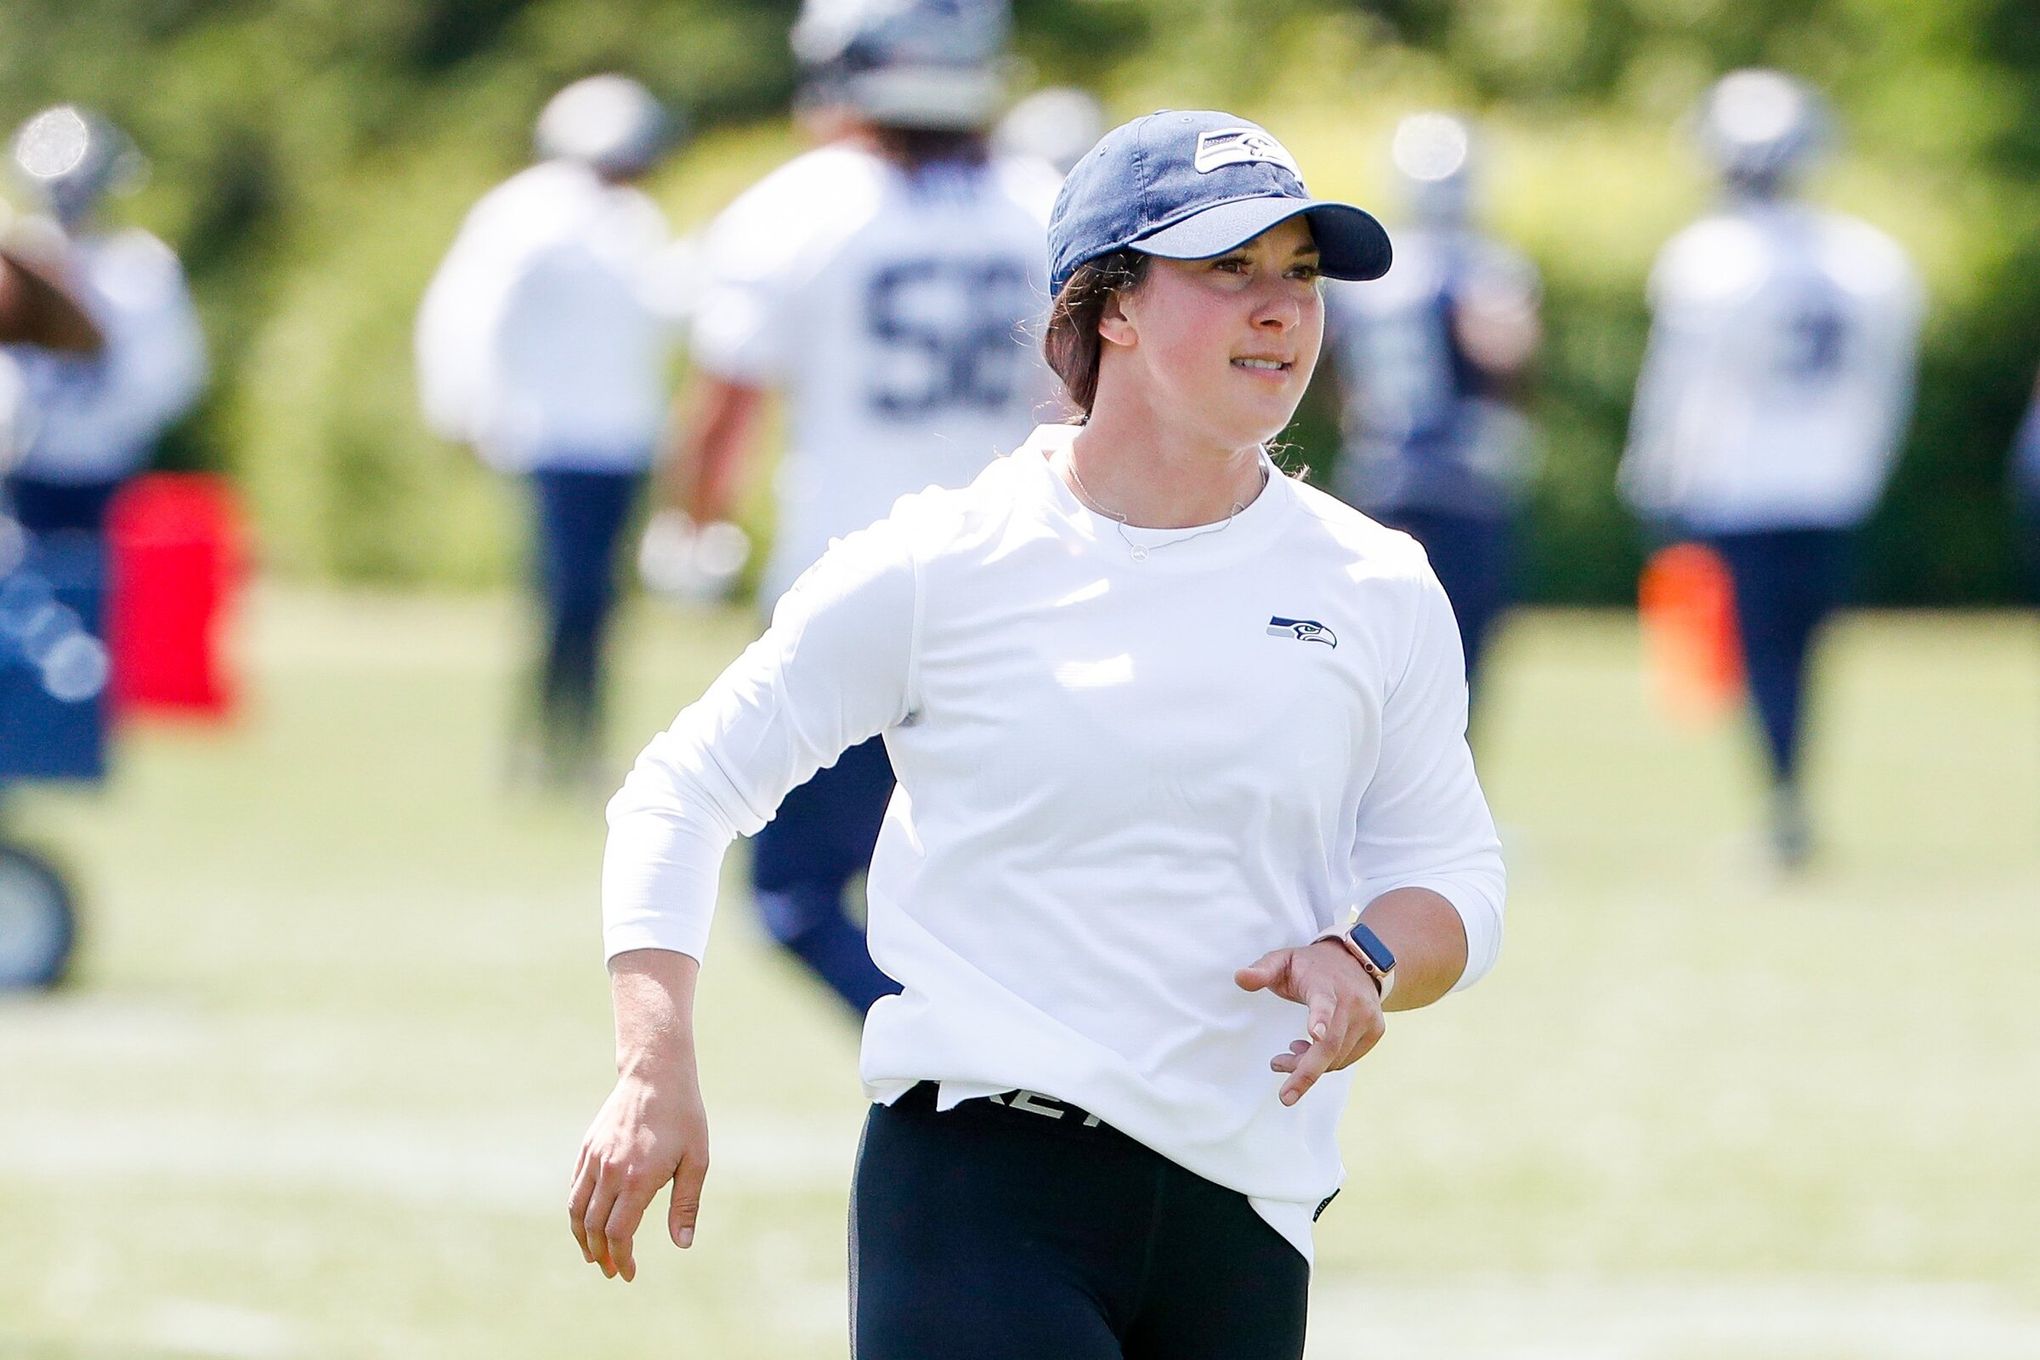 For Amanda Ruller, working with Seahawks is another step toward her NFL  coaching dream